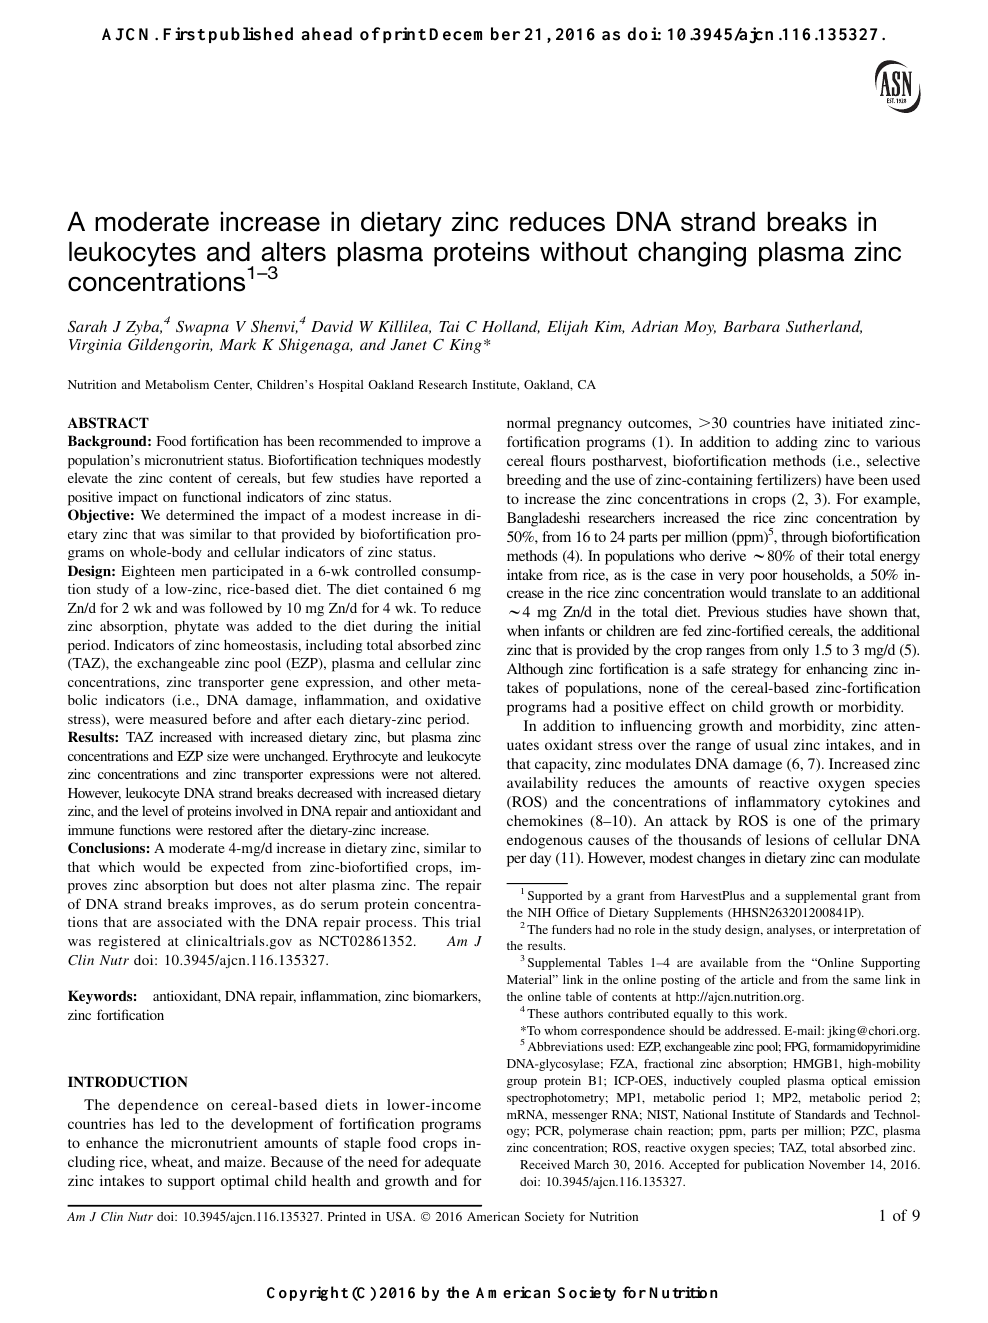 A Moderate Increase In Dietary Zinc Reduces Dna Strand Breaks In Leukocytes And Alters Plasma Proteins Without Changing Plasma Zinc Concentrations Topic Of Research Paper In Veterinary Science Download Scholarly Article